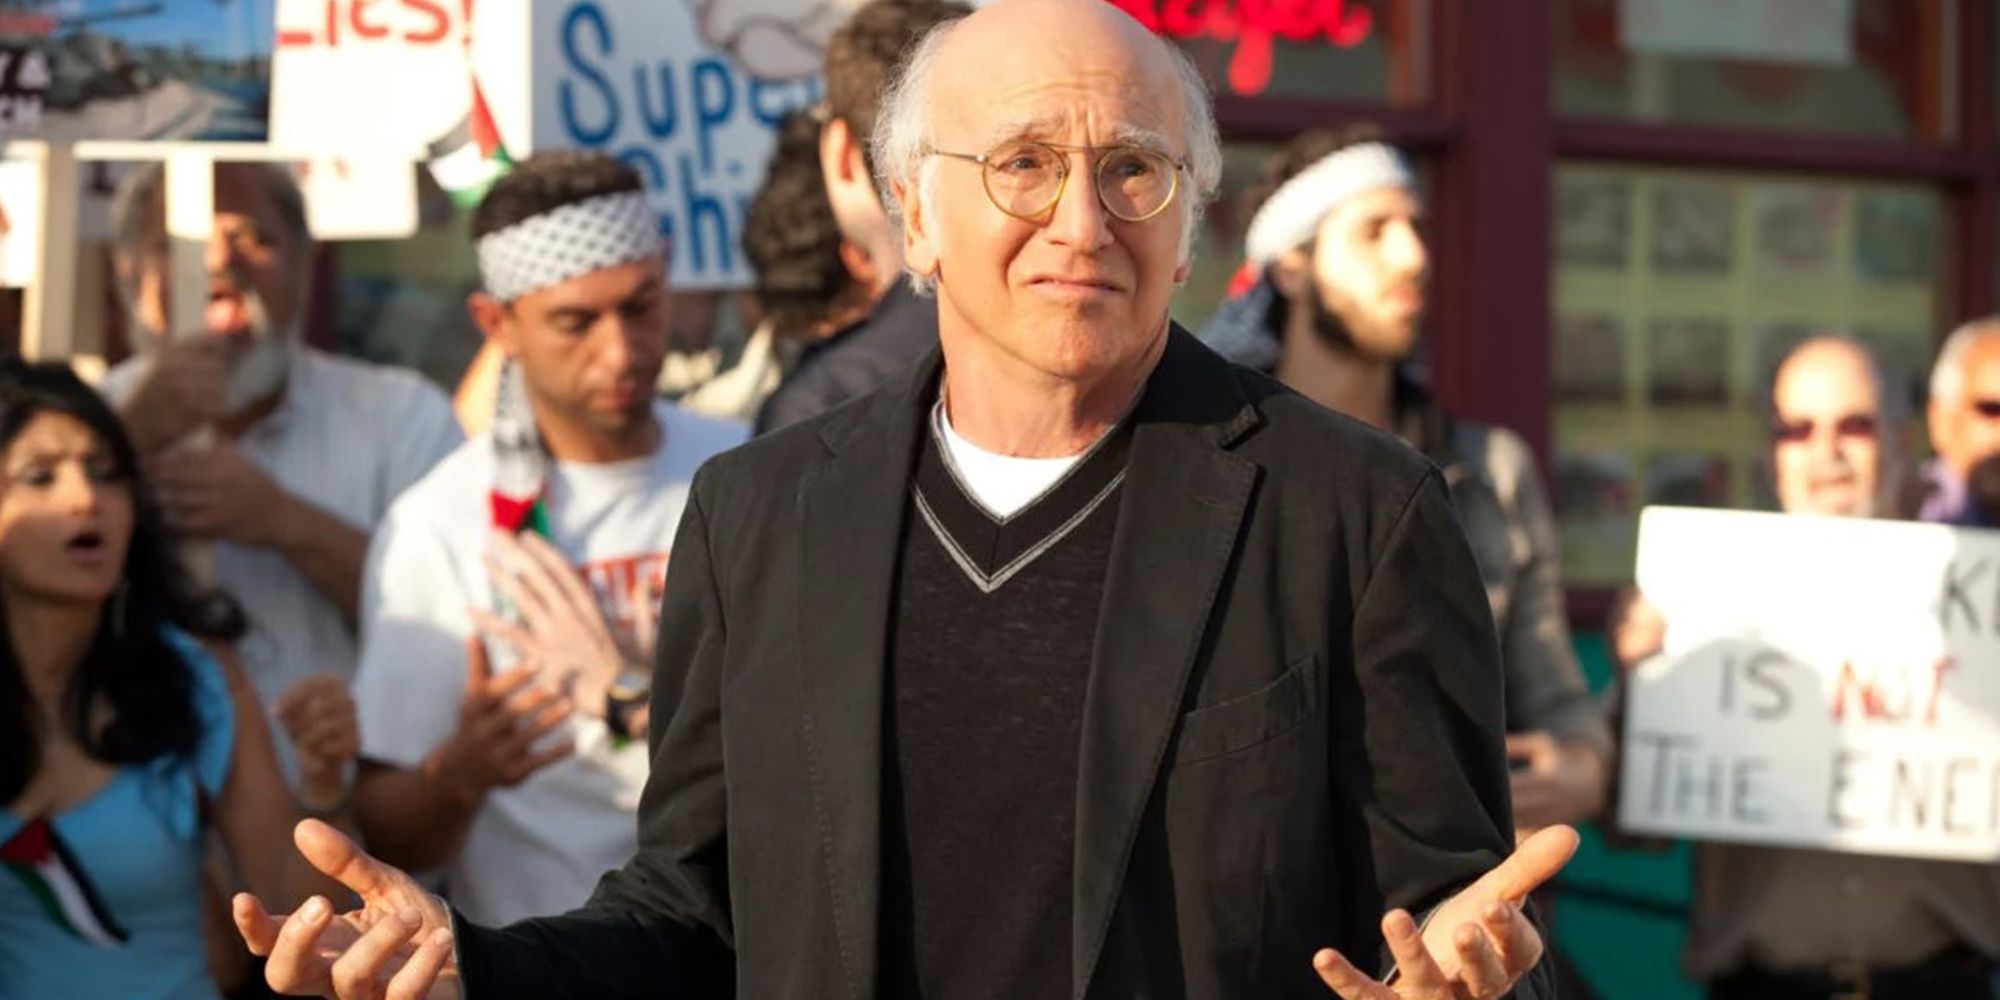 Larry David shrugging in front of a protest in Curb Your Enthusiasm.